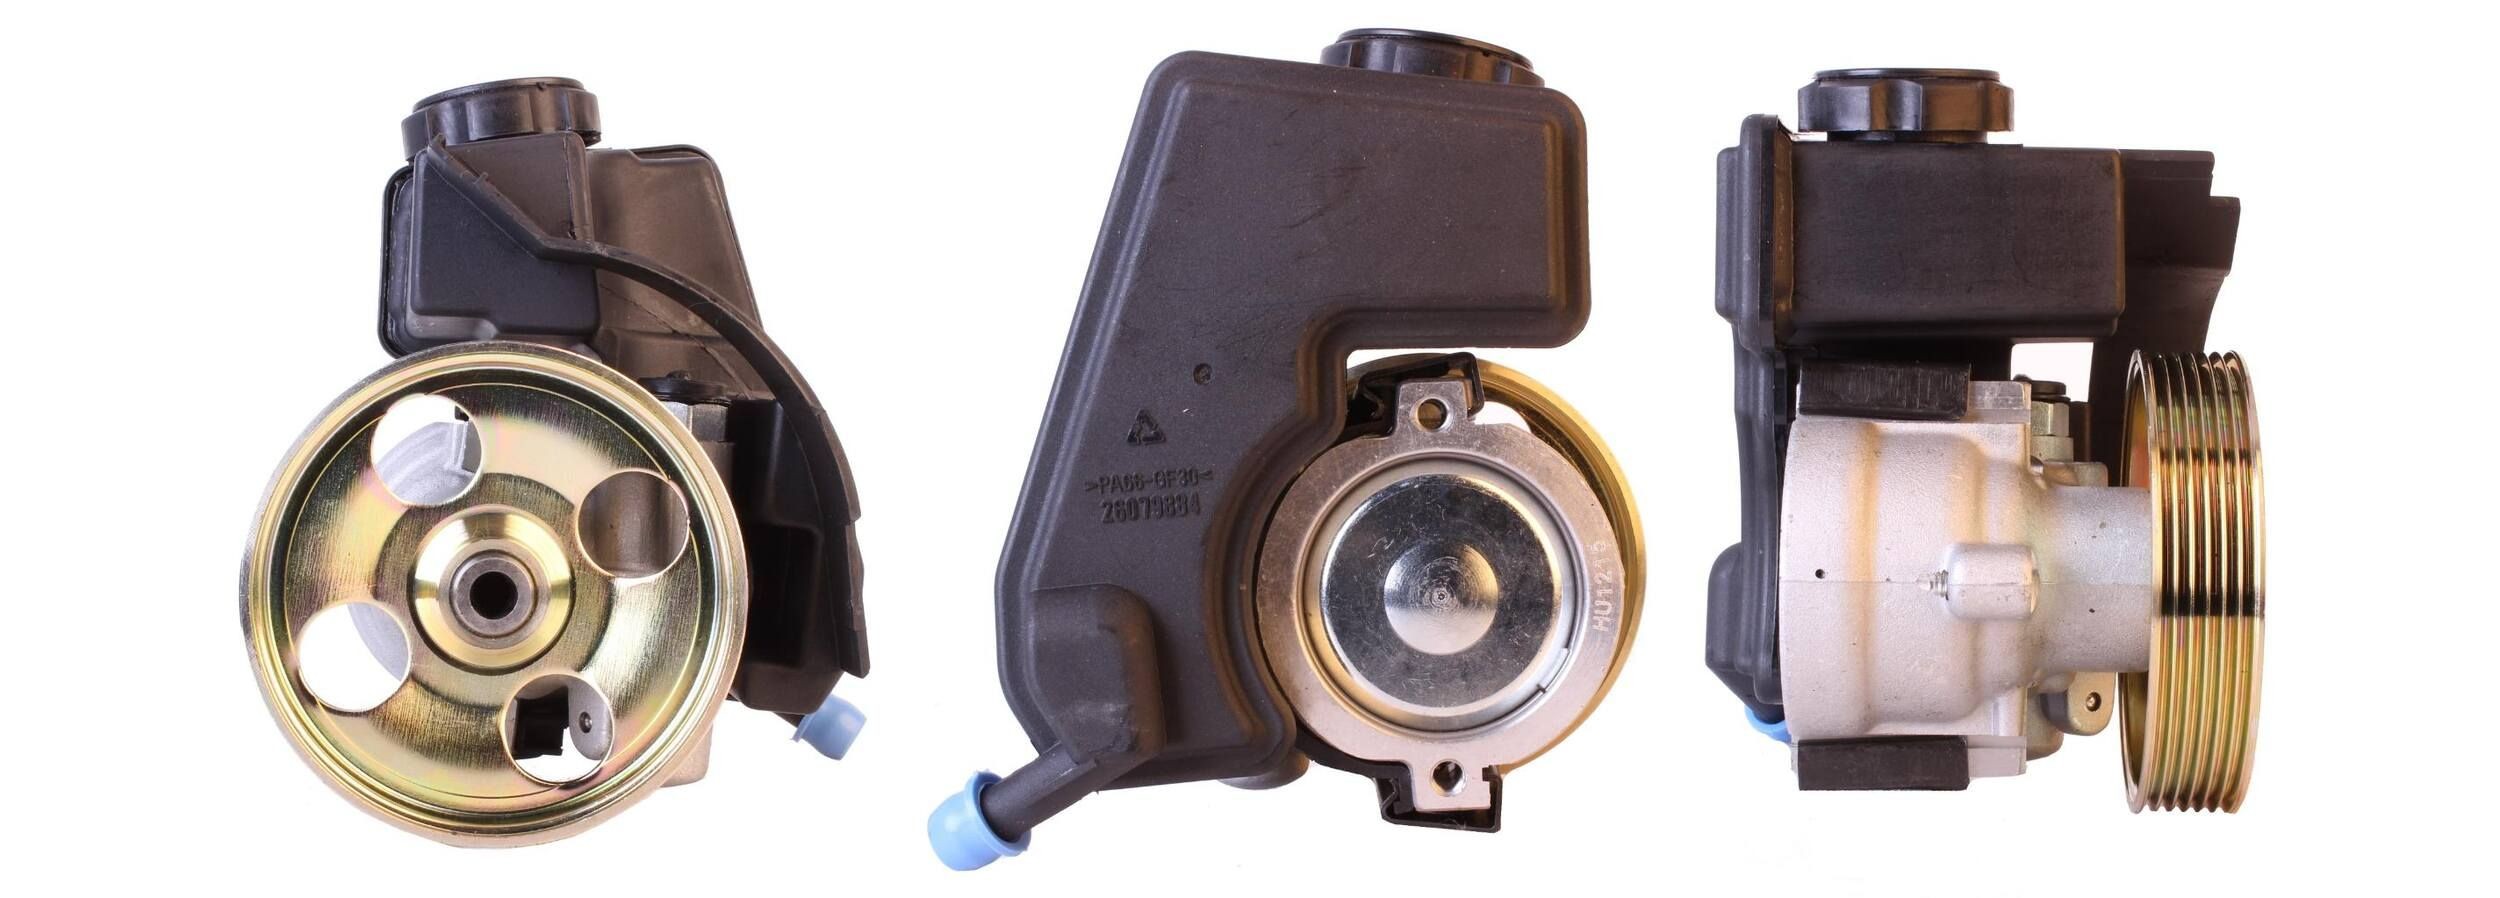 DRI 715520231 Power steering pump Hydraulic, 100 bar, Number of grooves: 6, Belt Pulley Ø: 114 mm, with reservoir